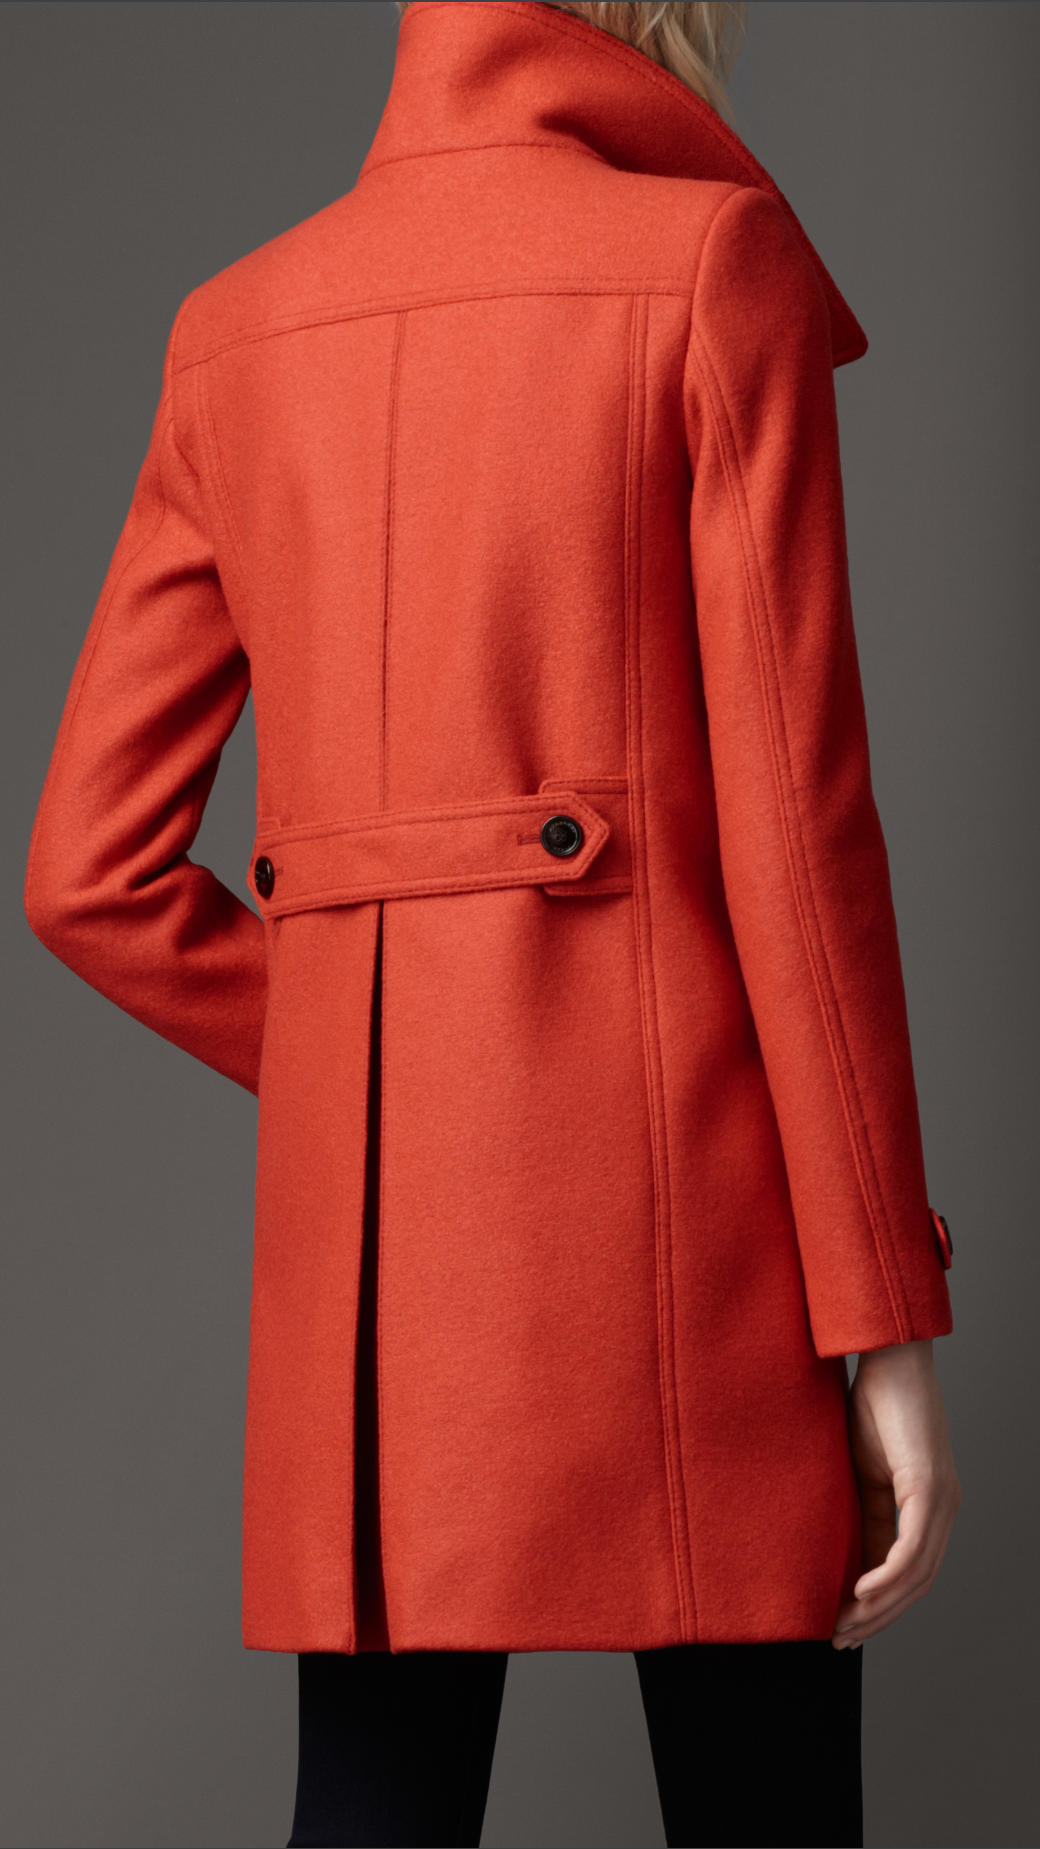 Lyst - Burberry Wool A-Line Coat in Red